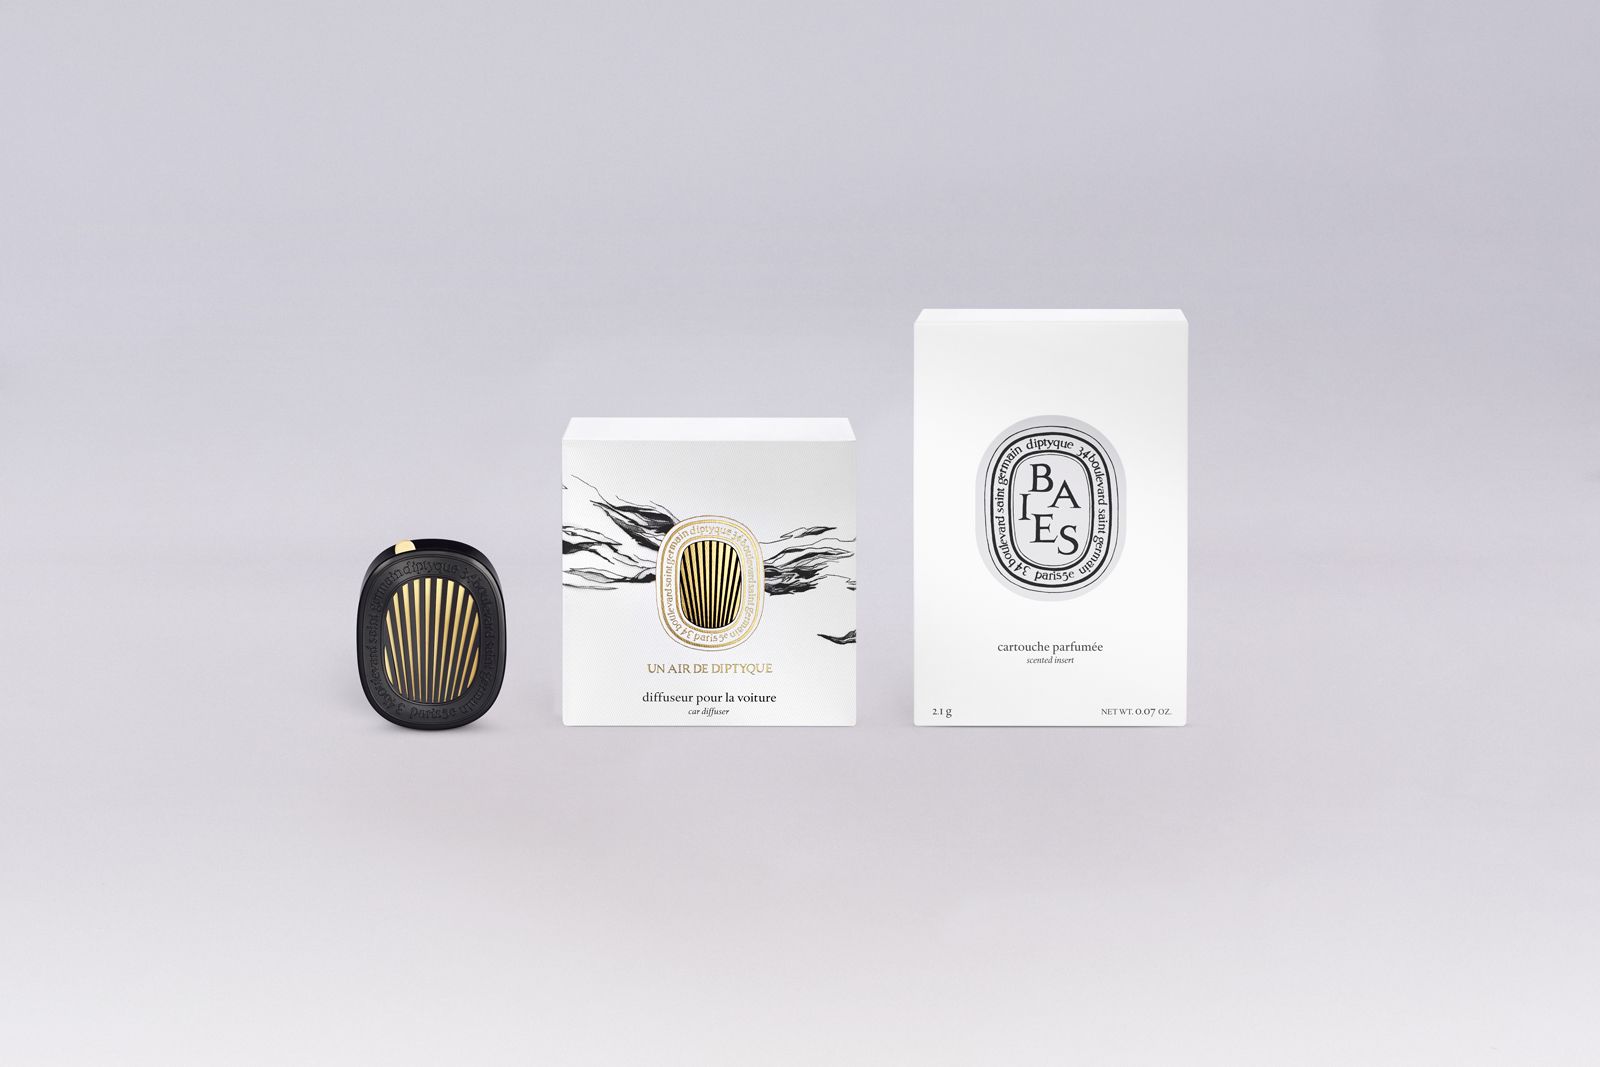 Diptyque's New Car Air Freshener - Diptyque Candles